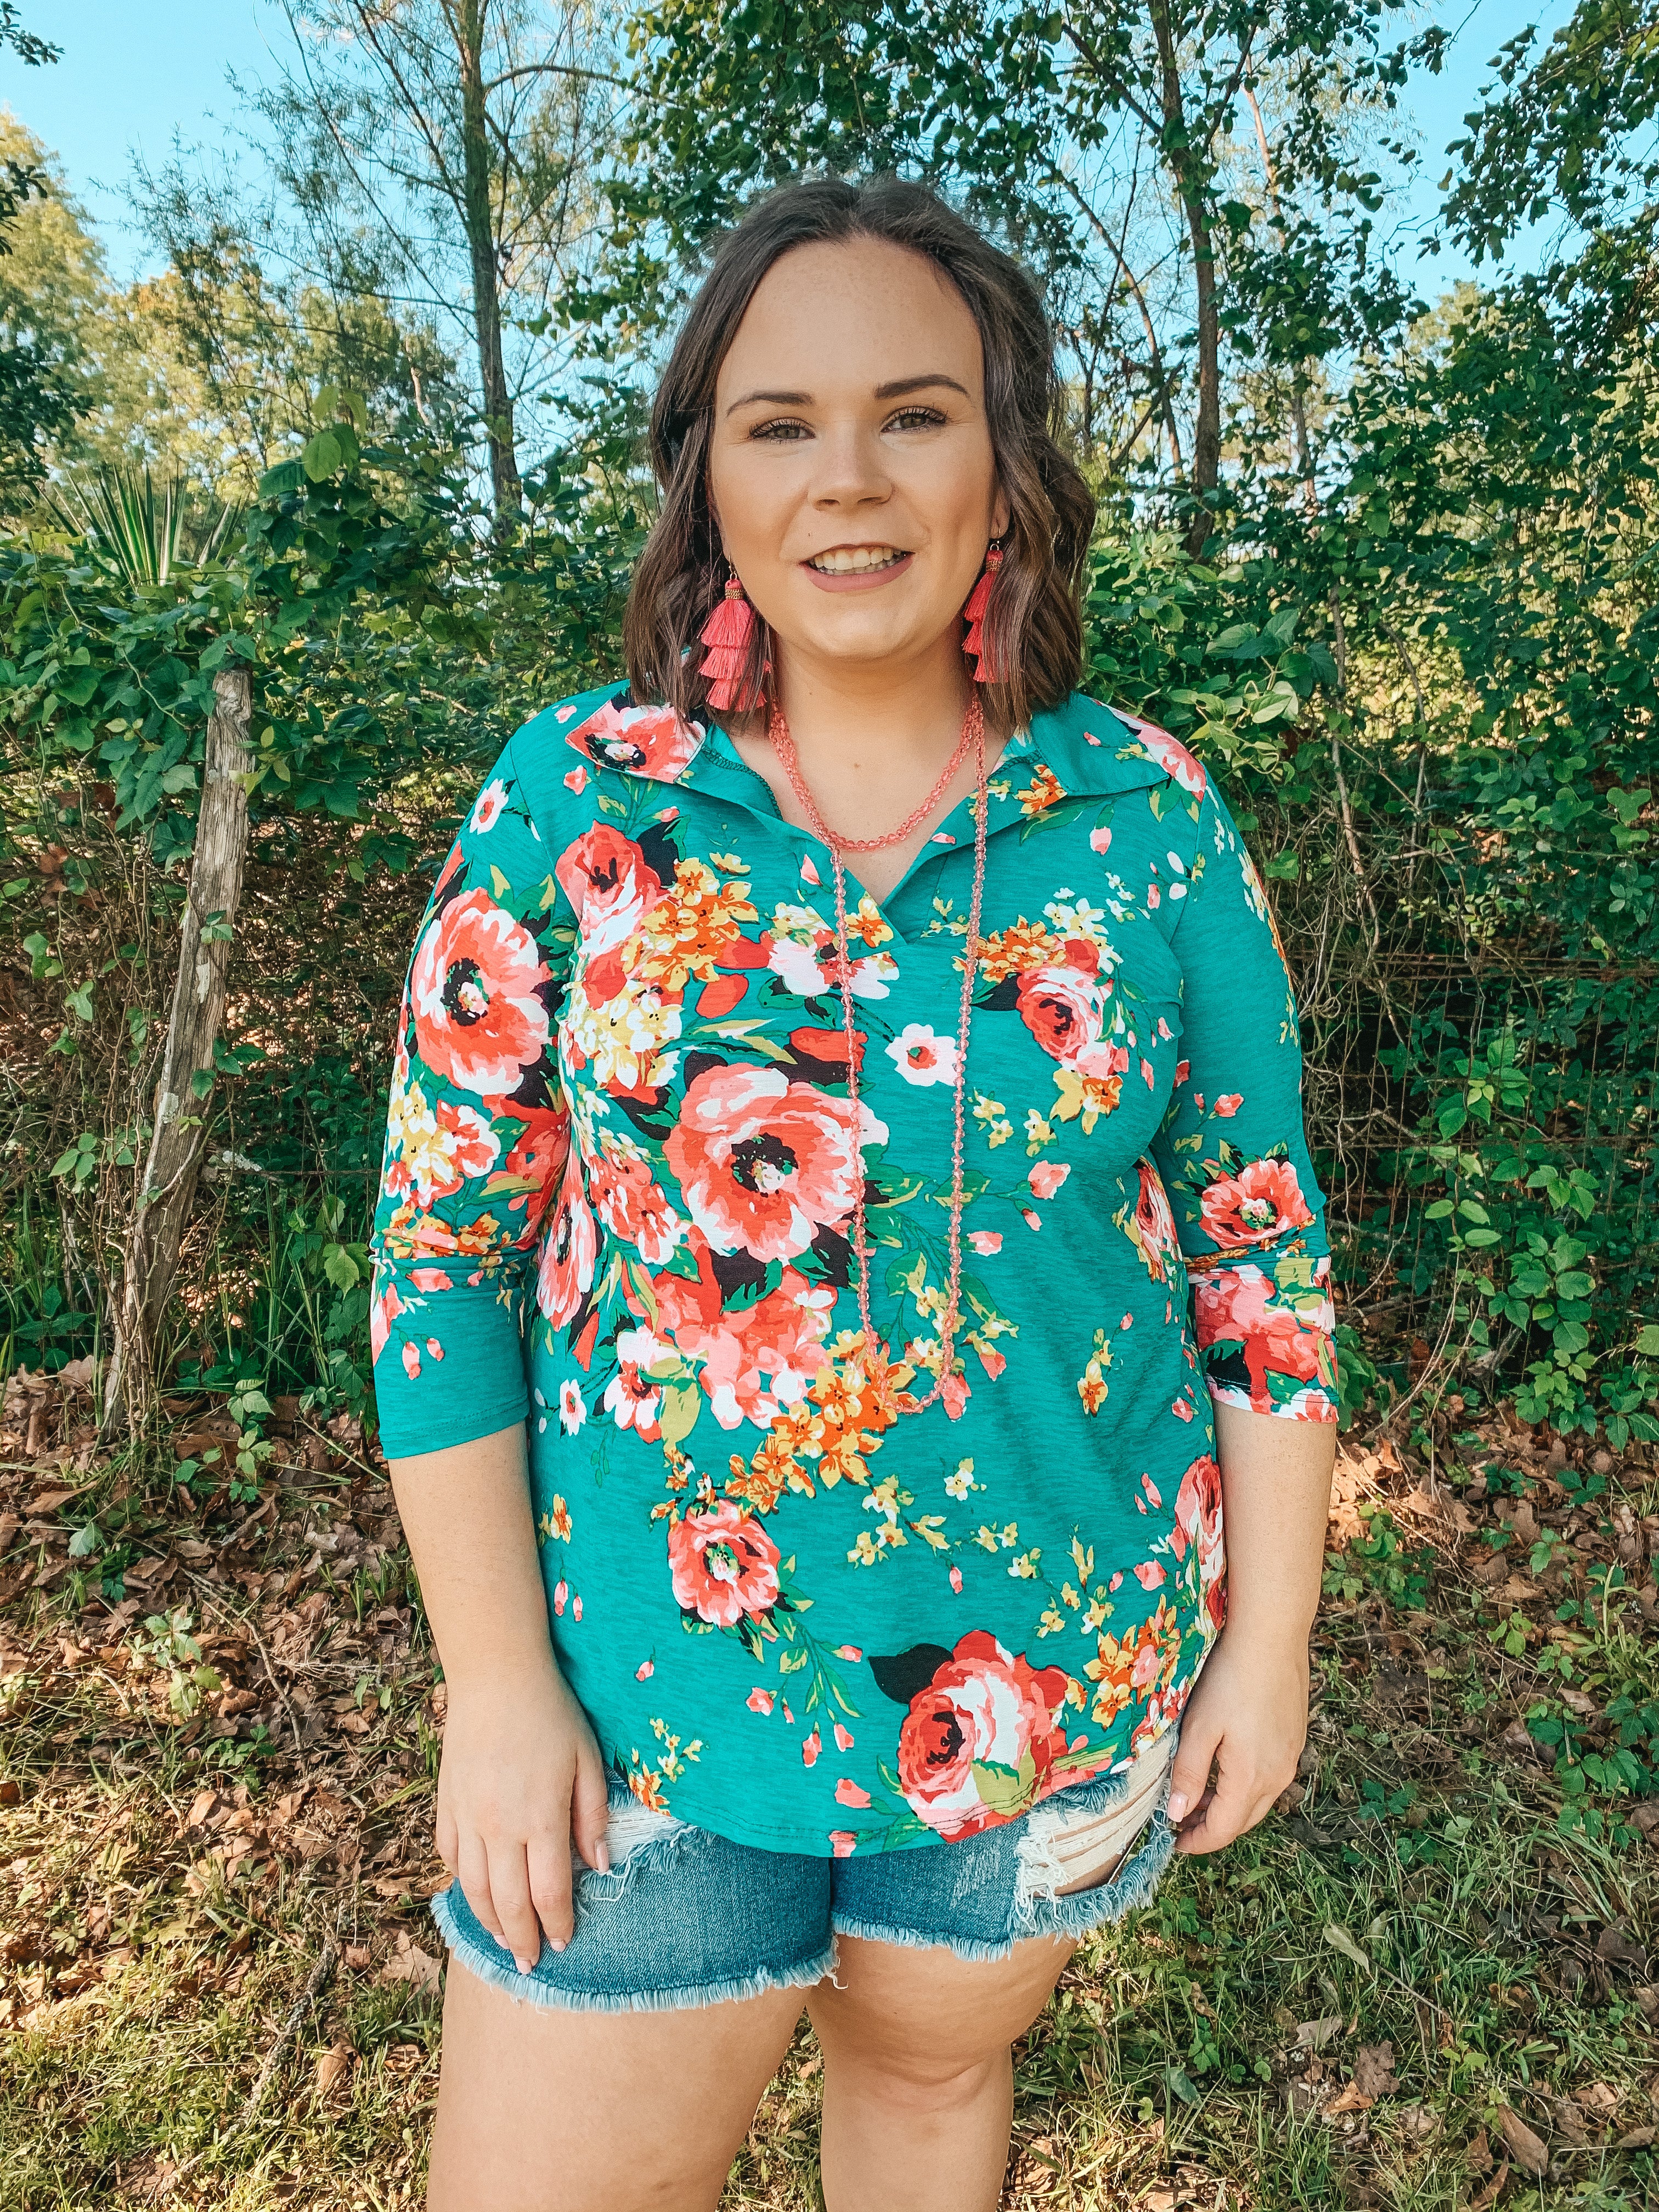 Last Chance Size S, M, & 3XL | Scenic Route Floral Collared Tunic Top in Teal - Giddy Up Glamour Boutique